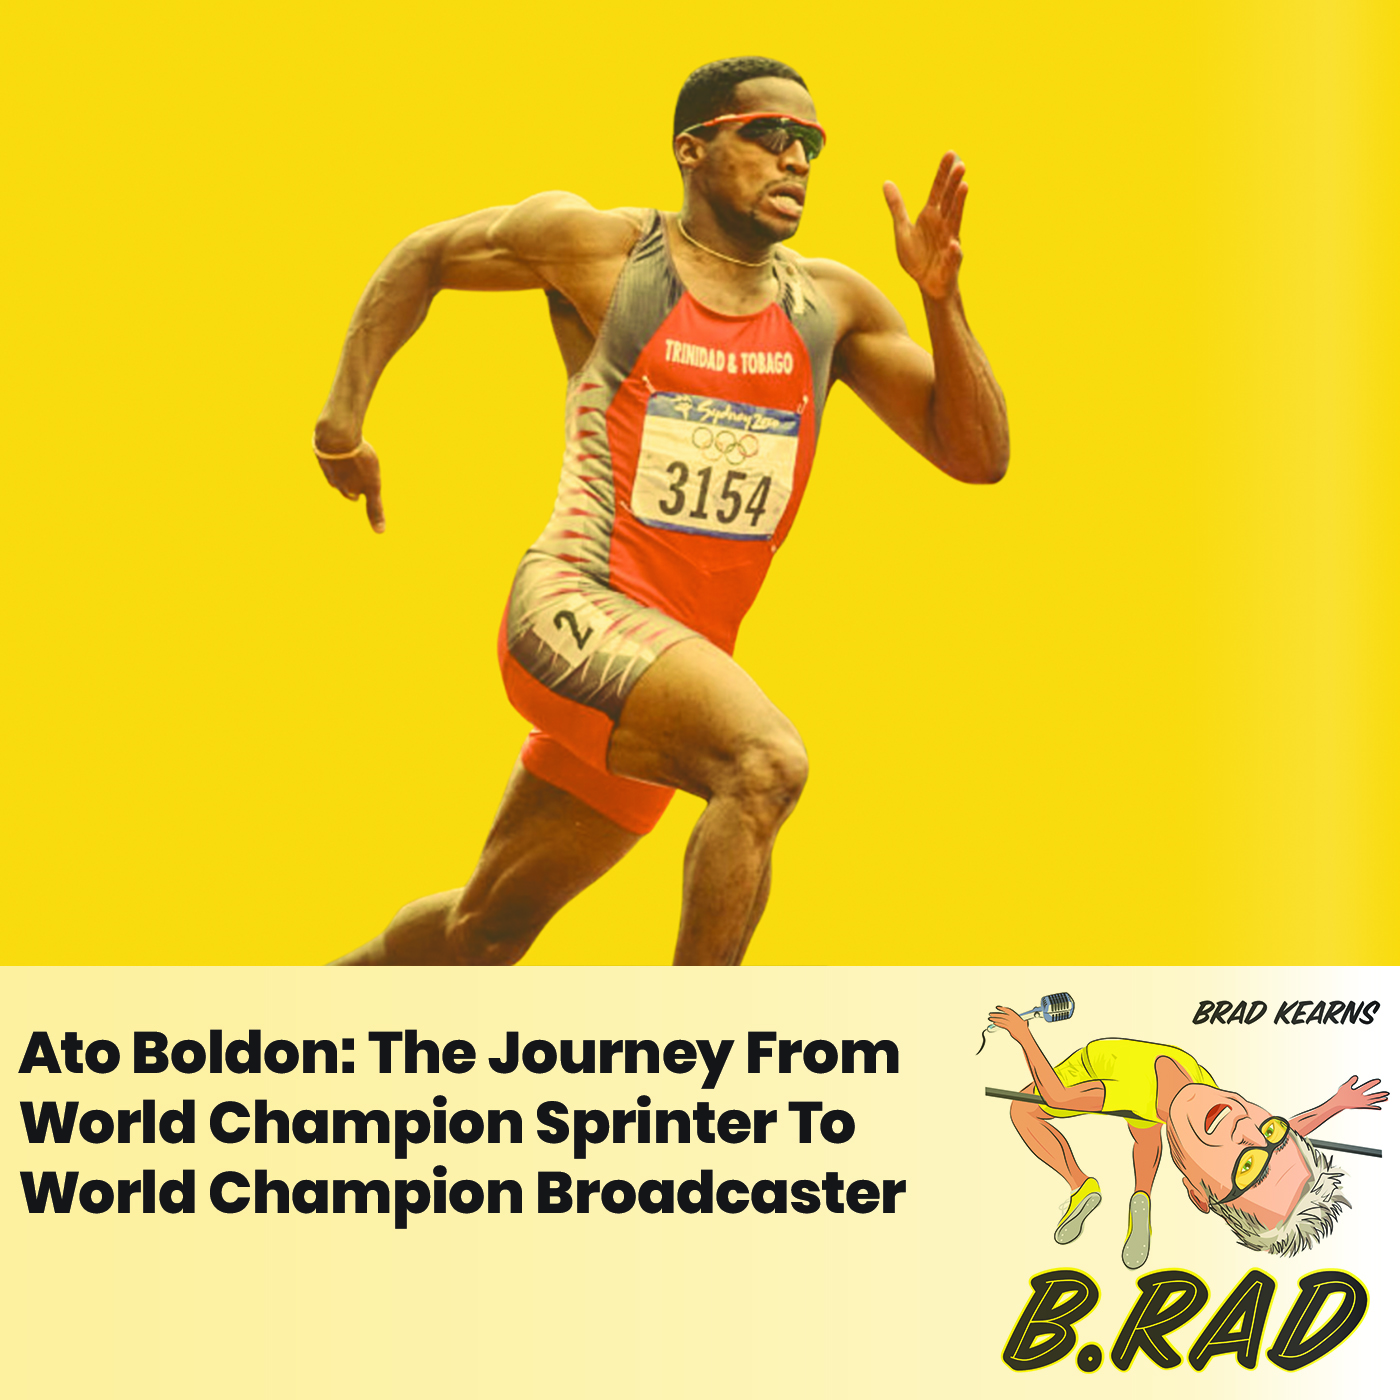 Ato Boldon: The Journey From World Champion Sprinter To World Champion Broadcaster